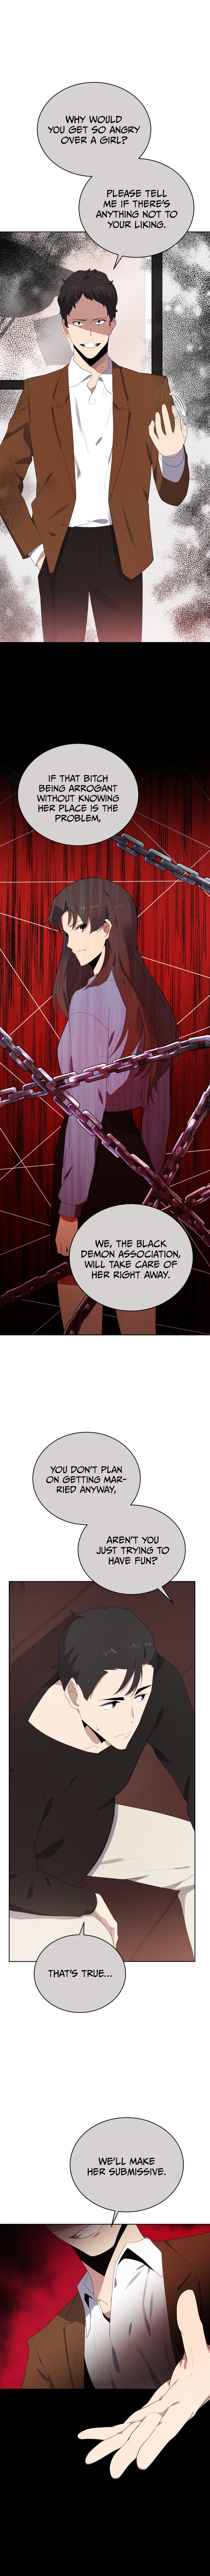 The Descent of the Demonic Master - Chapter 122 Page 7